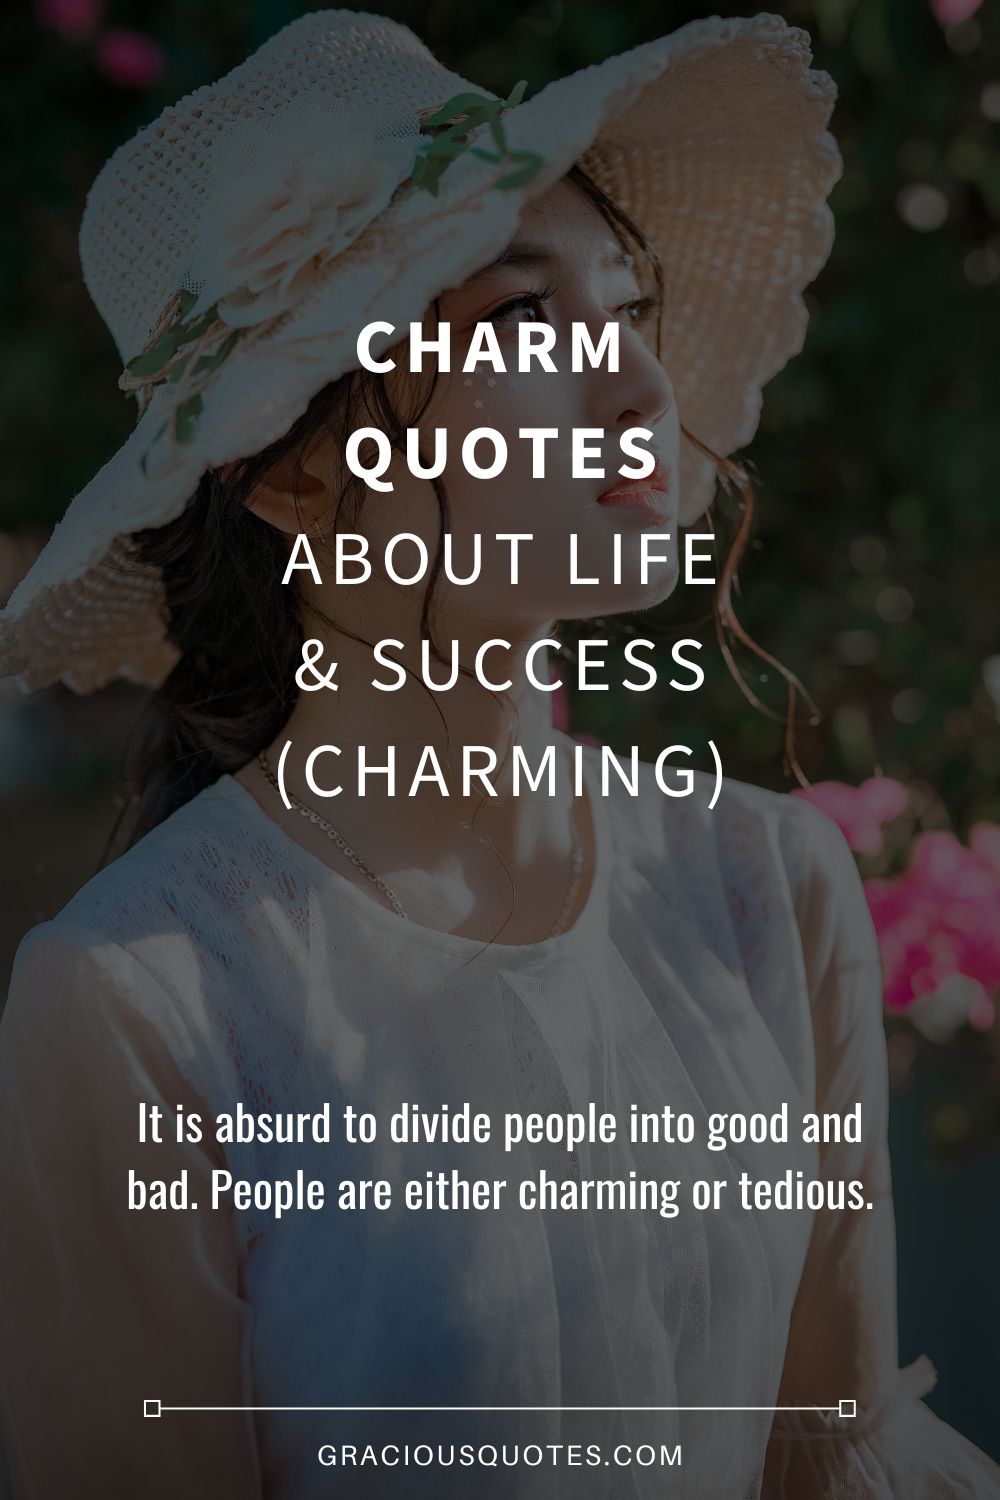 Charm Quotes About Life & Success (CHARMING) - Gracious Quotes